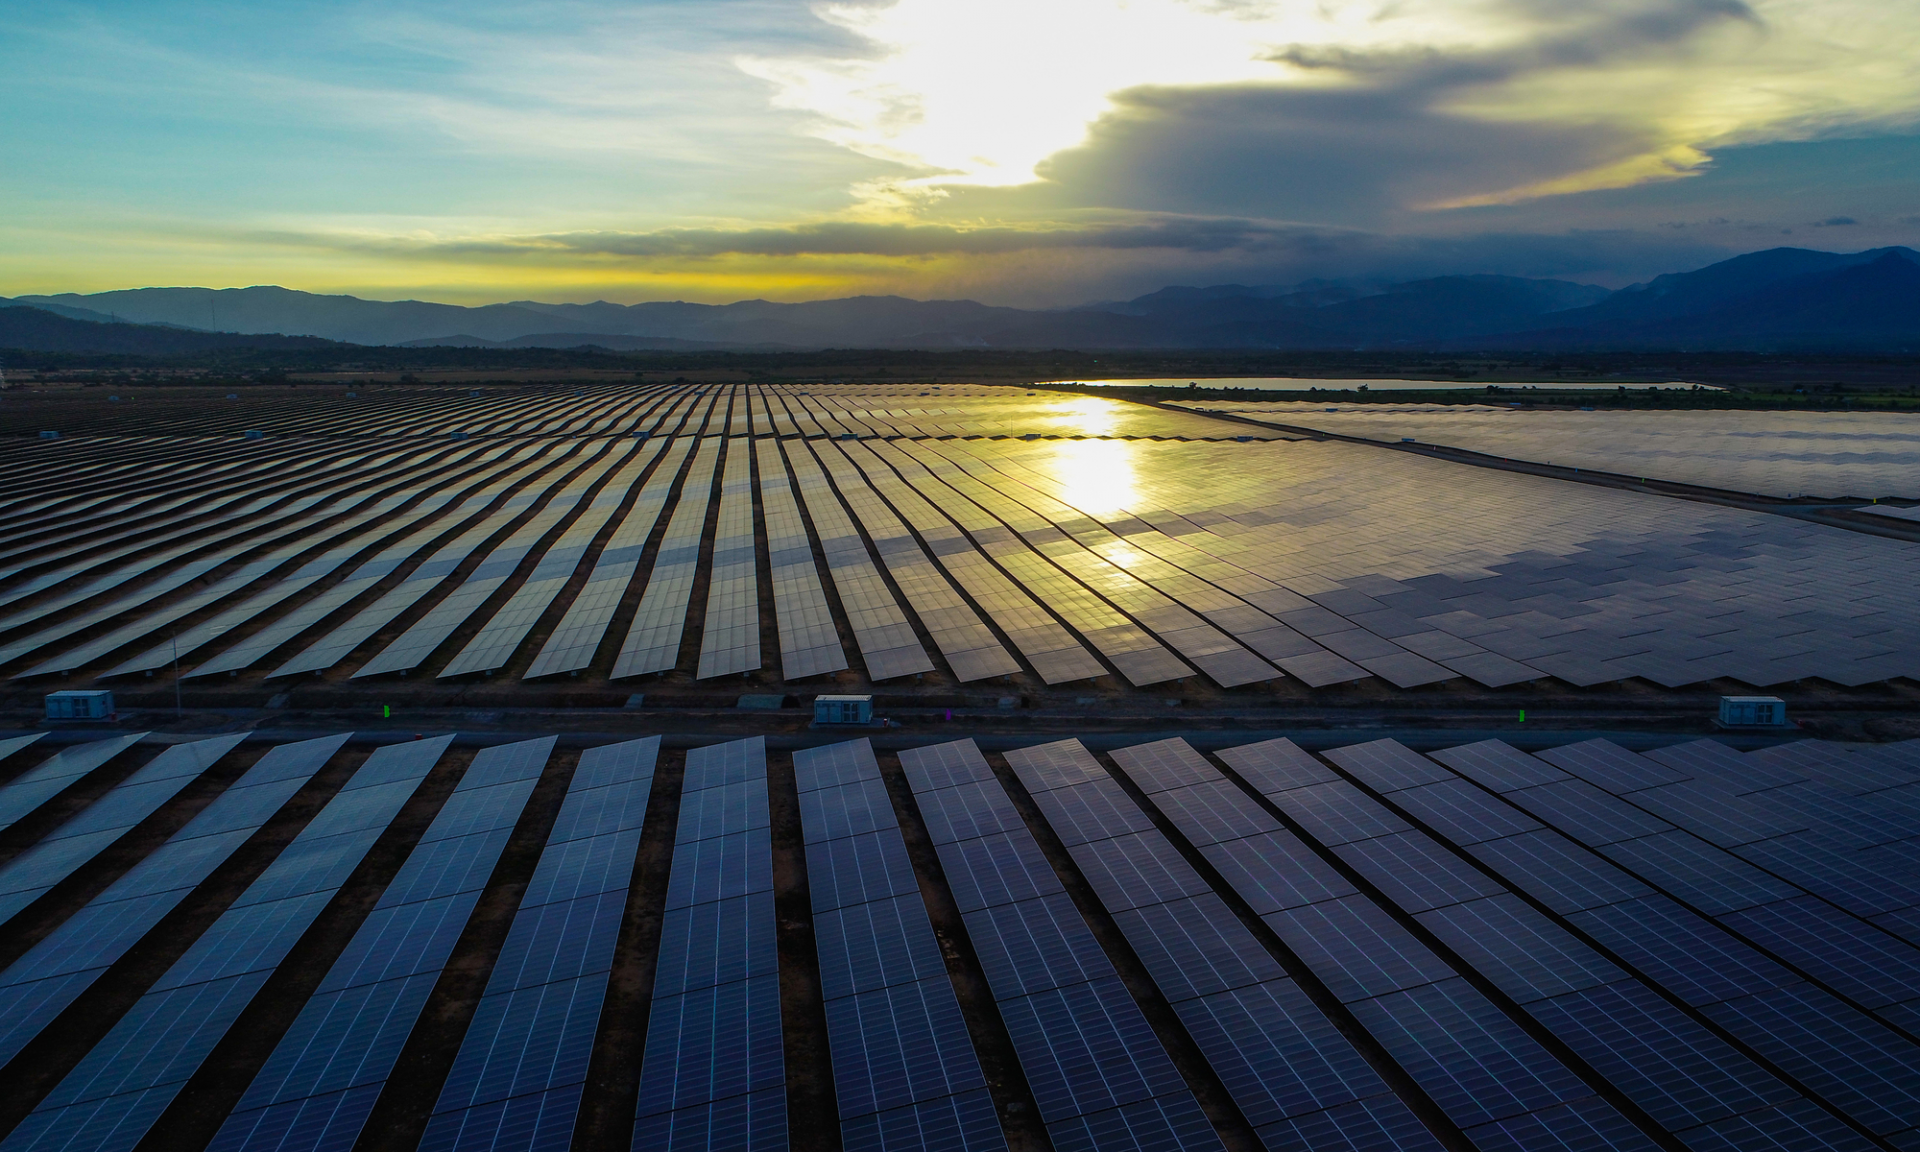 Solar power panels at the BIM Solar Power Complex in Ninh Thuan Province, central Vietnam. Photo by VnExpress/Quynh Tran.